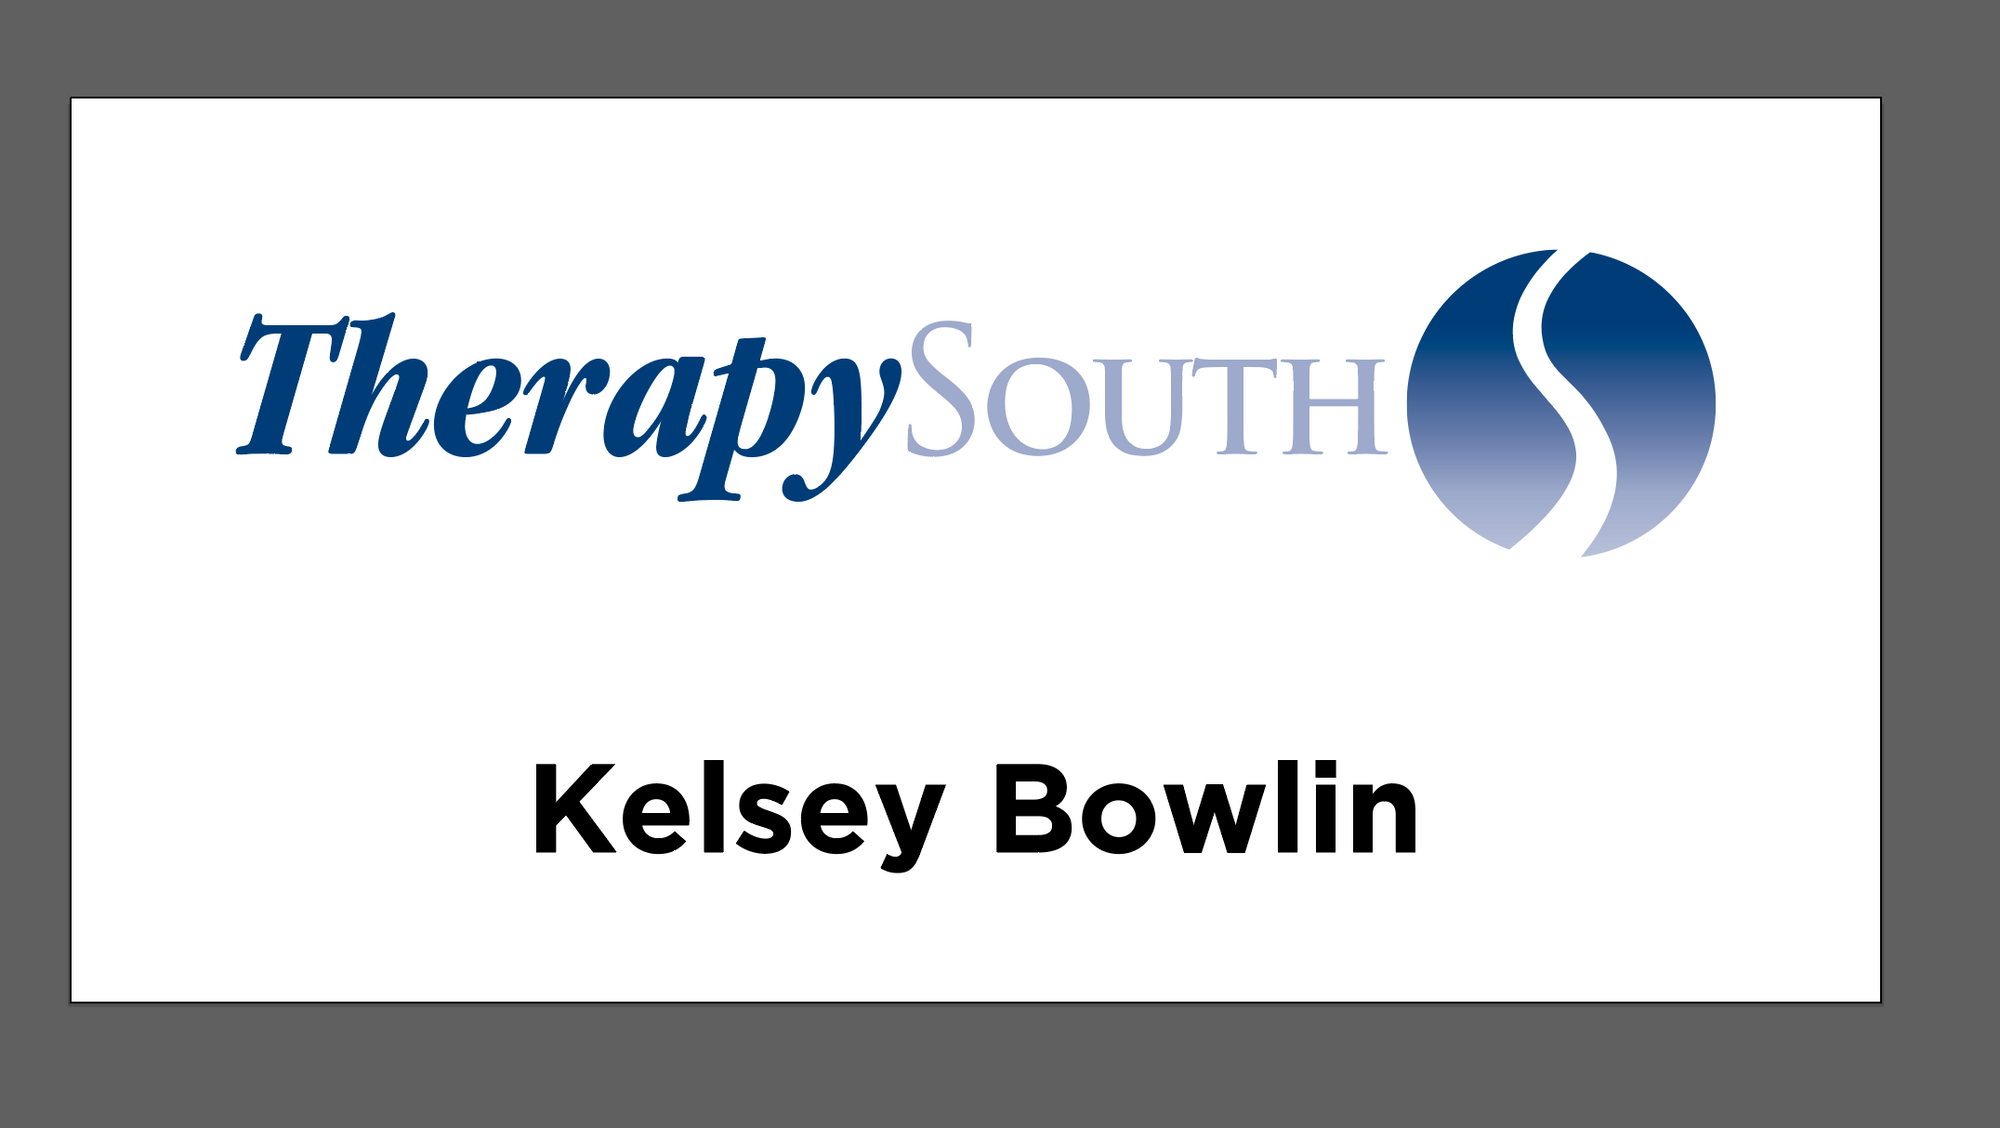 TherapySouth Namebadge